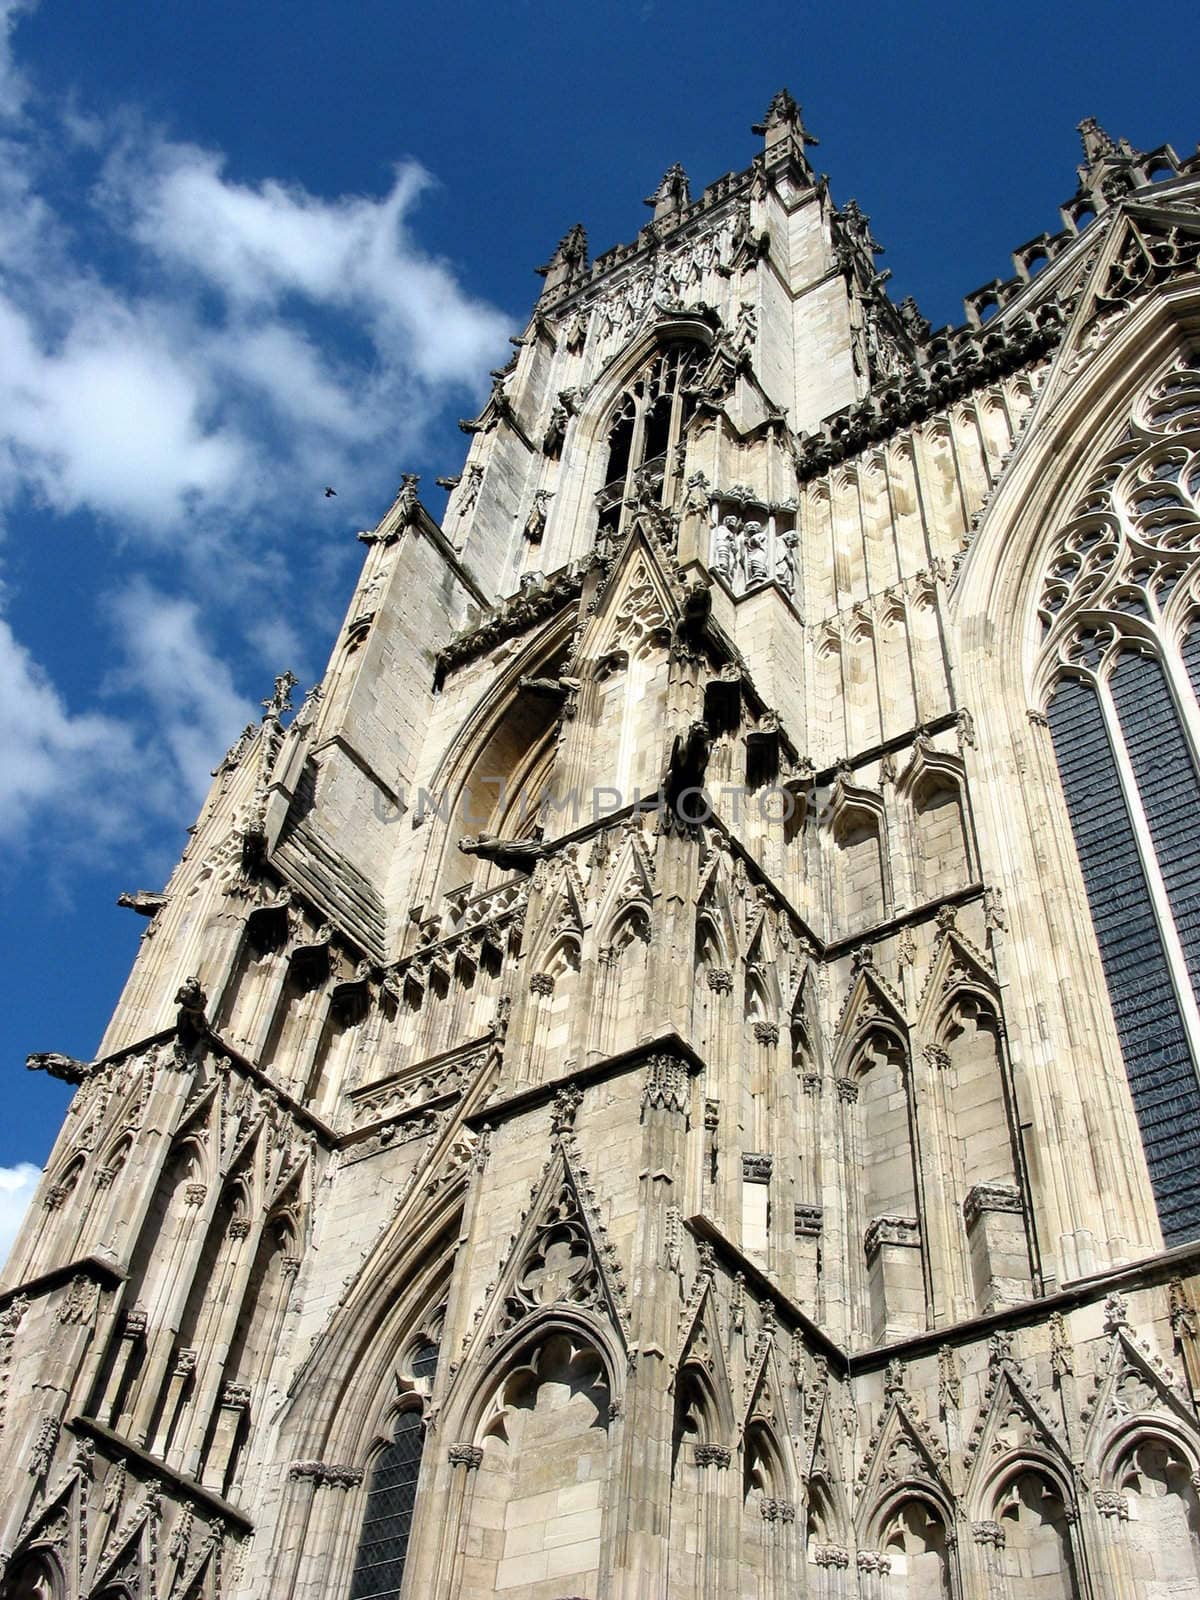 York is a famous  town in northen England,  with a beautiful gothic cathedral, roman, viking and norman monuments and ruins